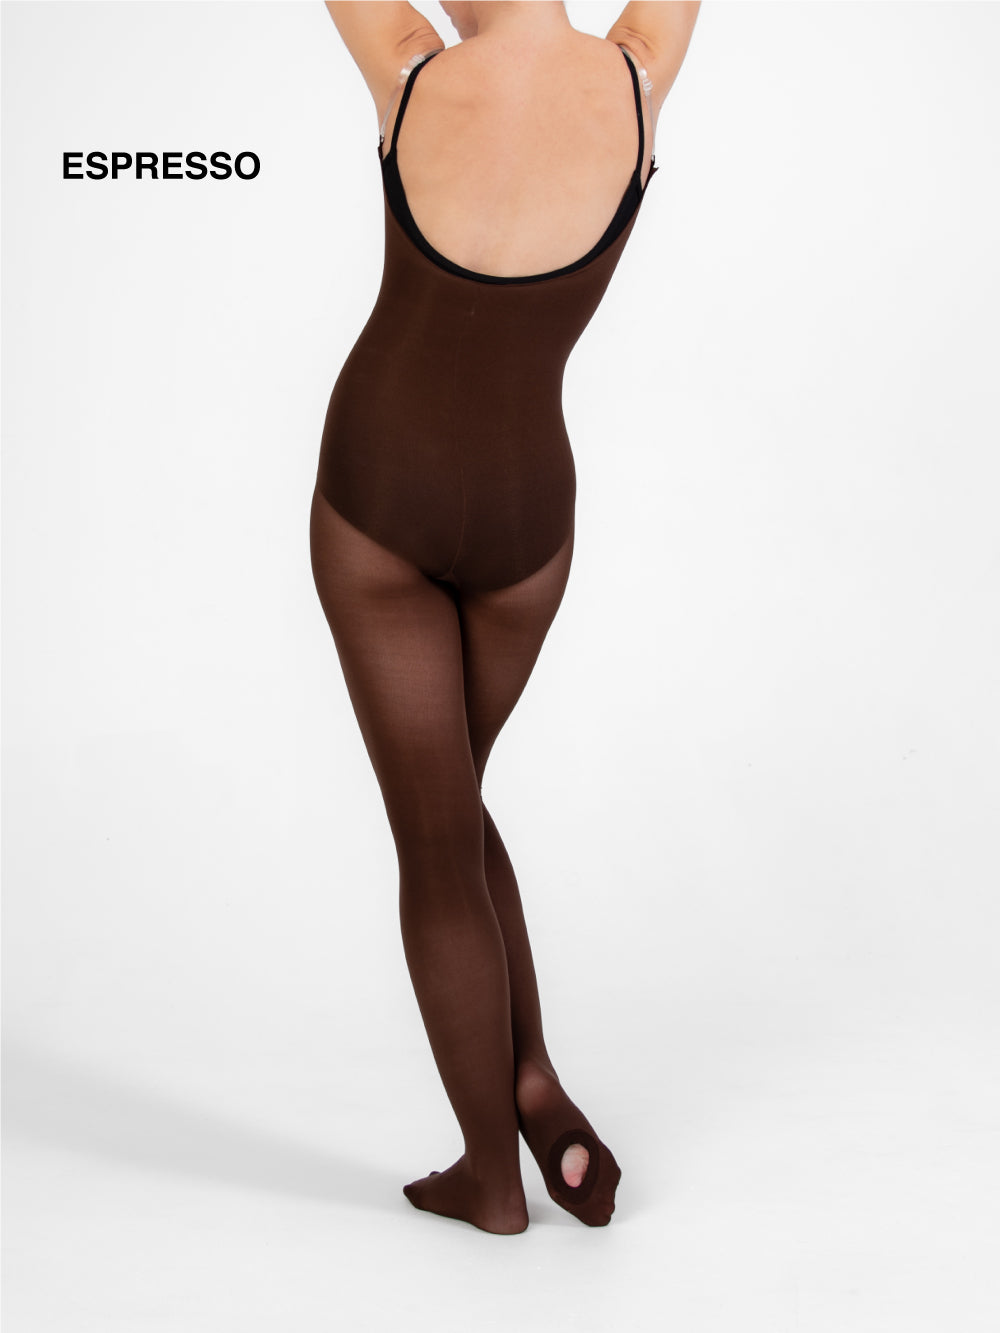 TotalSTRETCH Seamless Camisole Convertible Body Tights